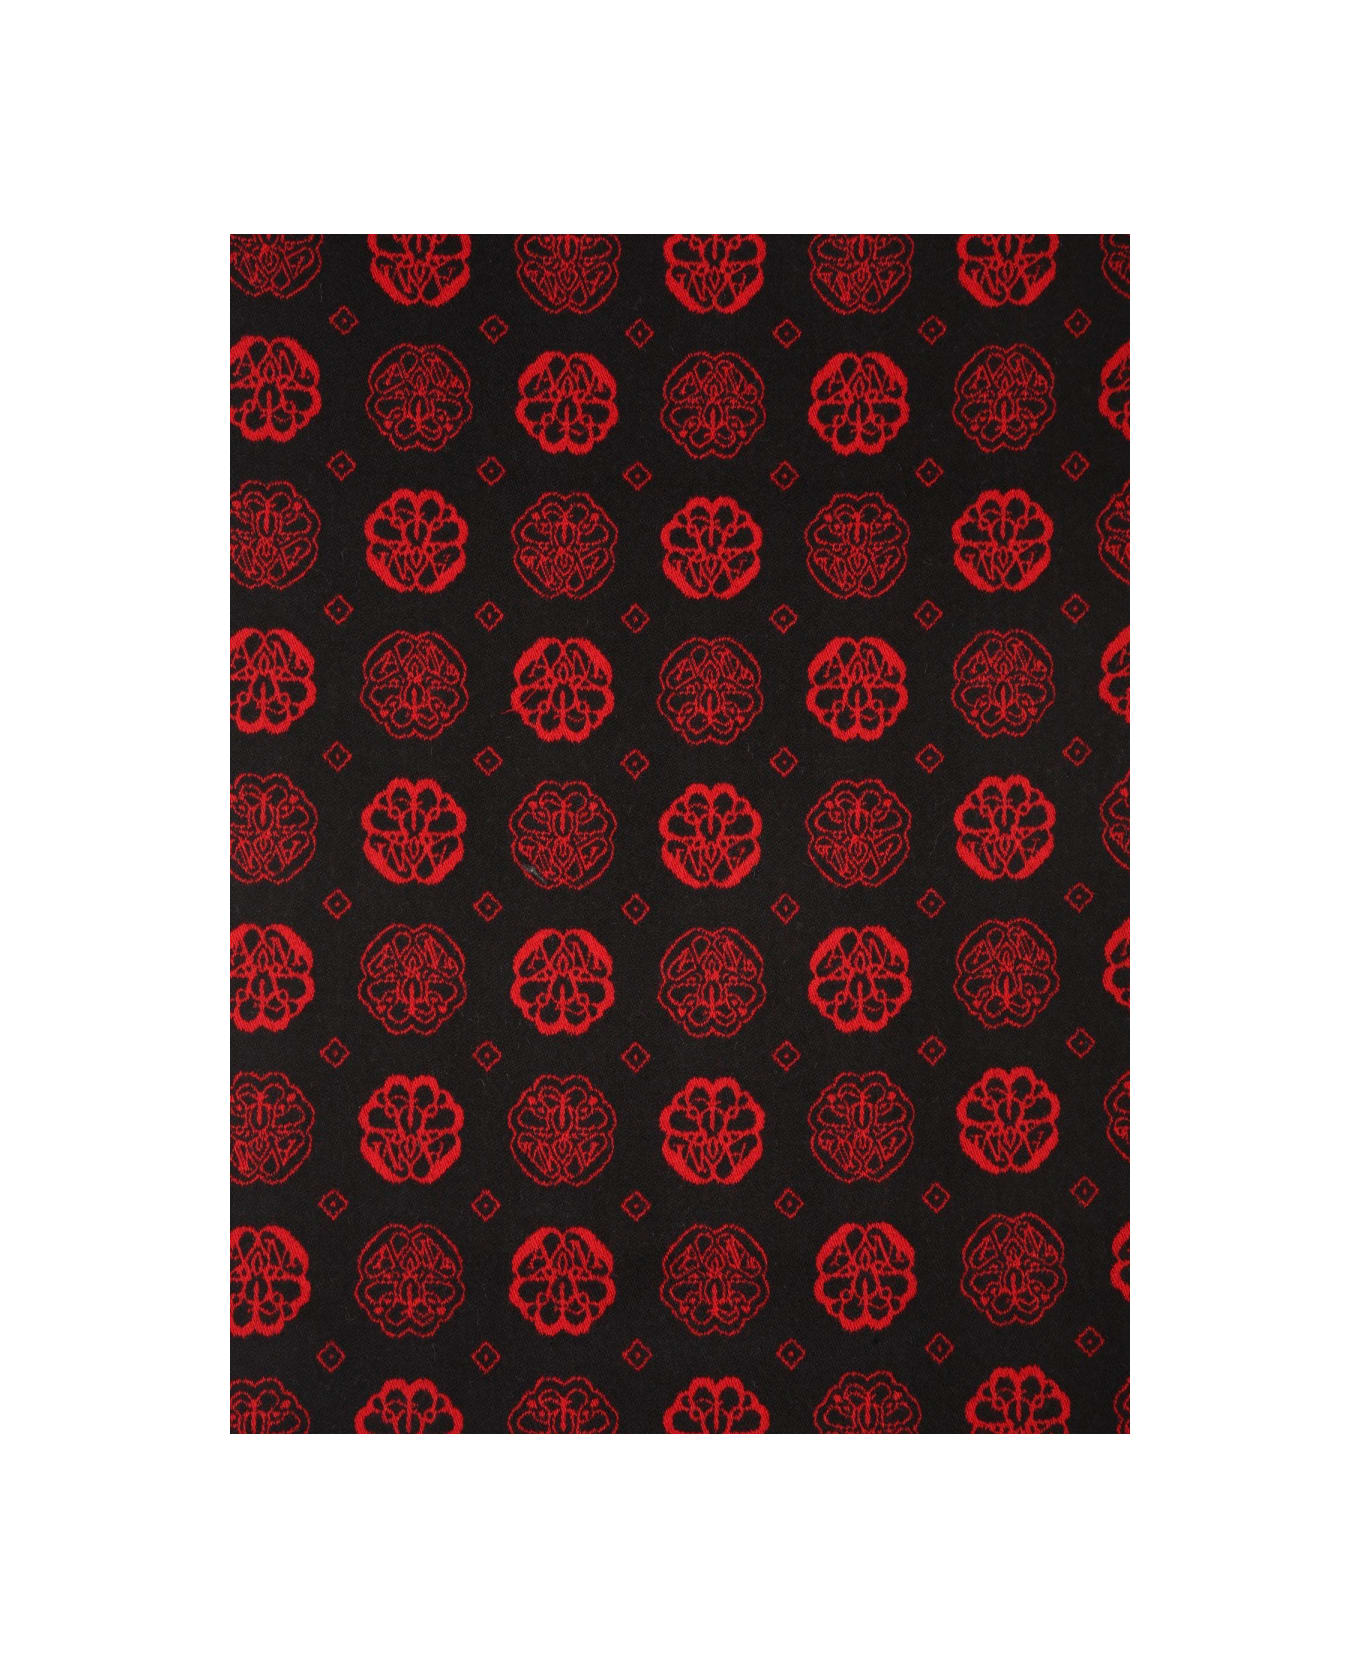 Alexander McQueen Scarf With Jacquard Pattern - BLACK